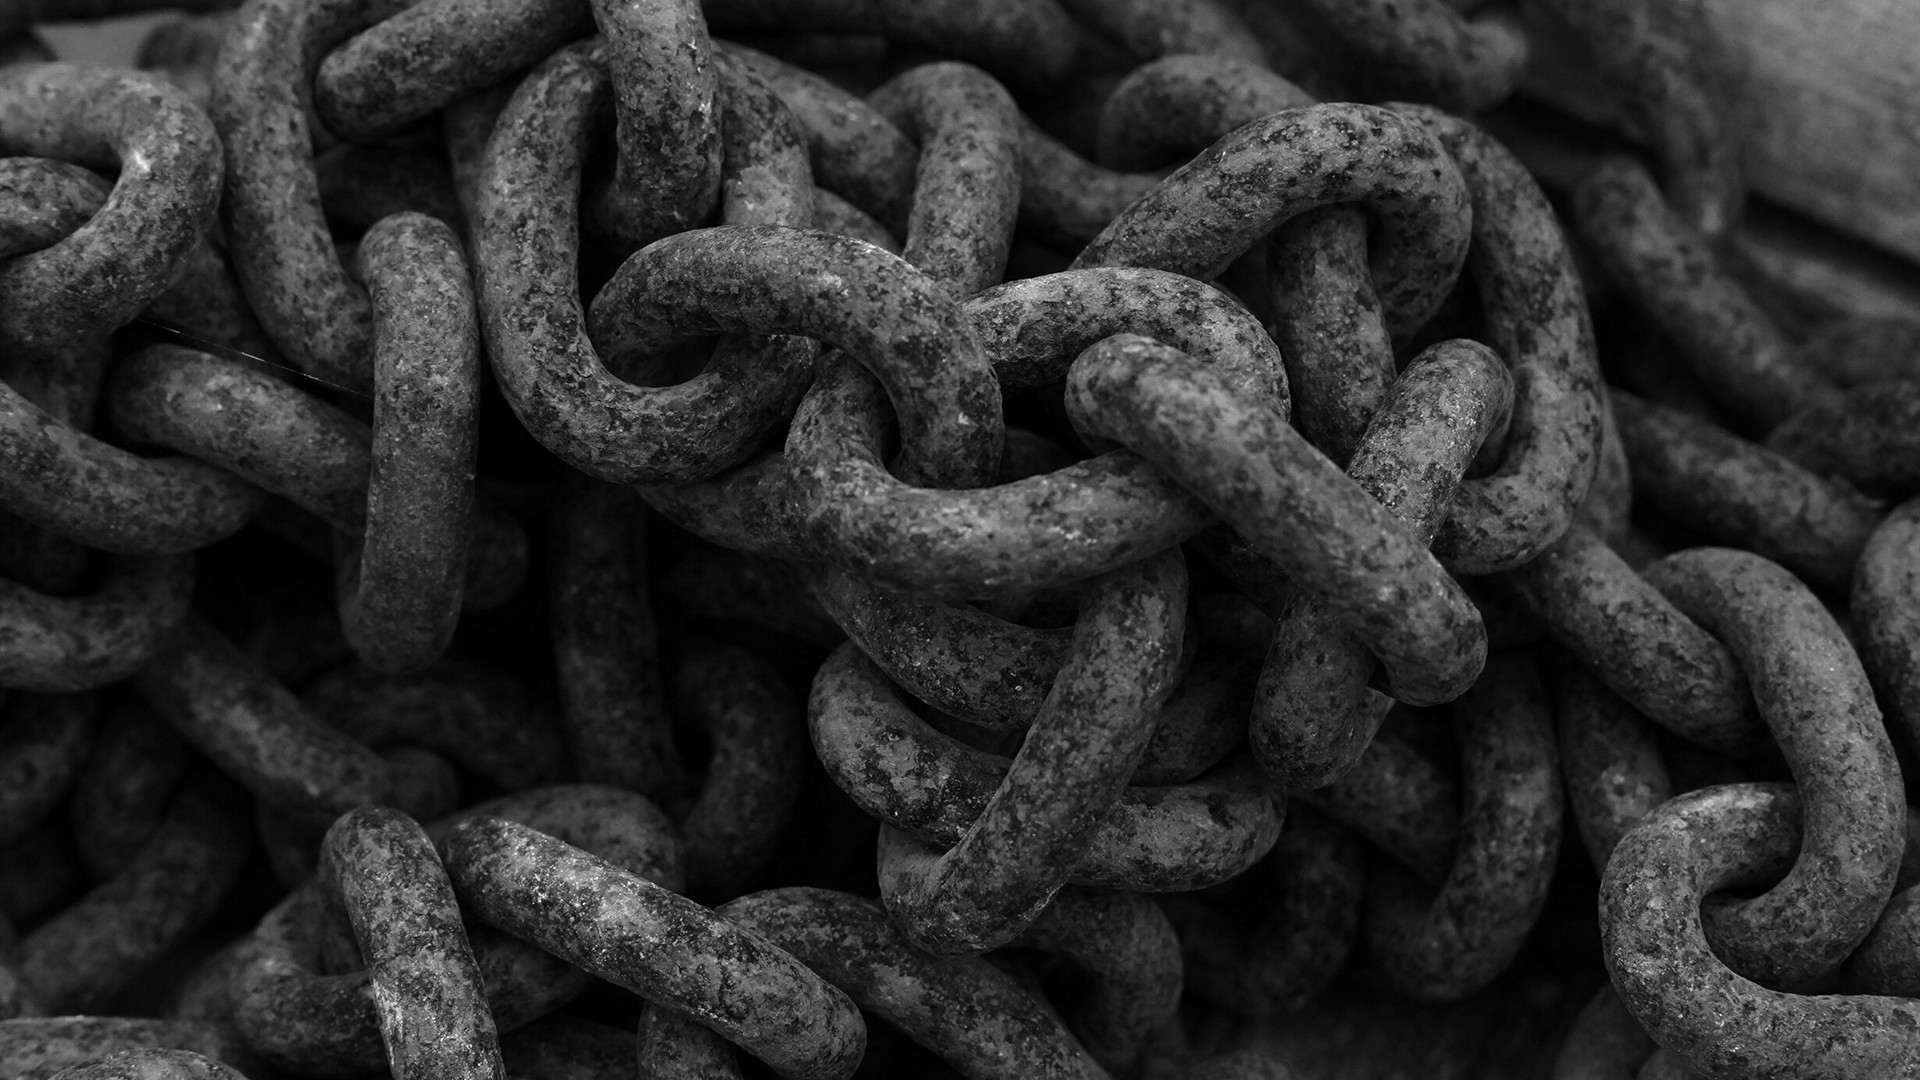 Man Made Chain HD Wallpaper | Background Image